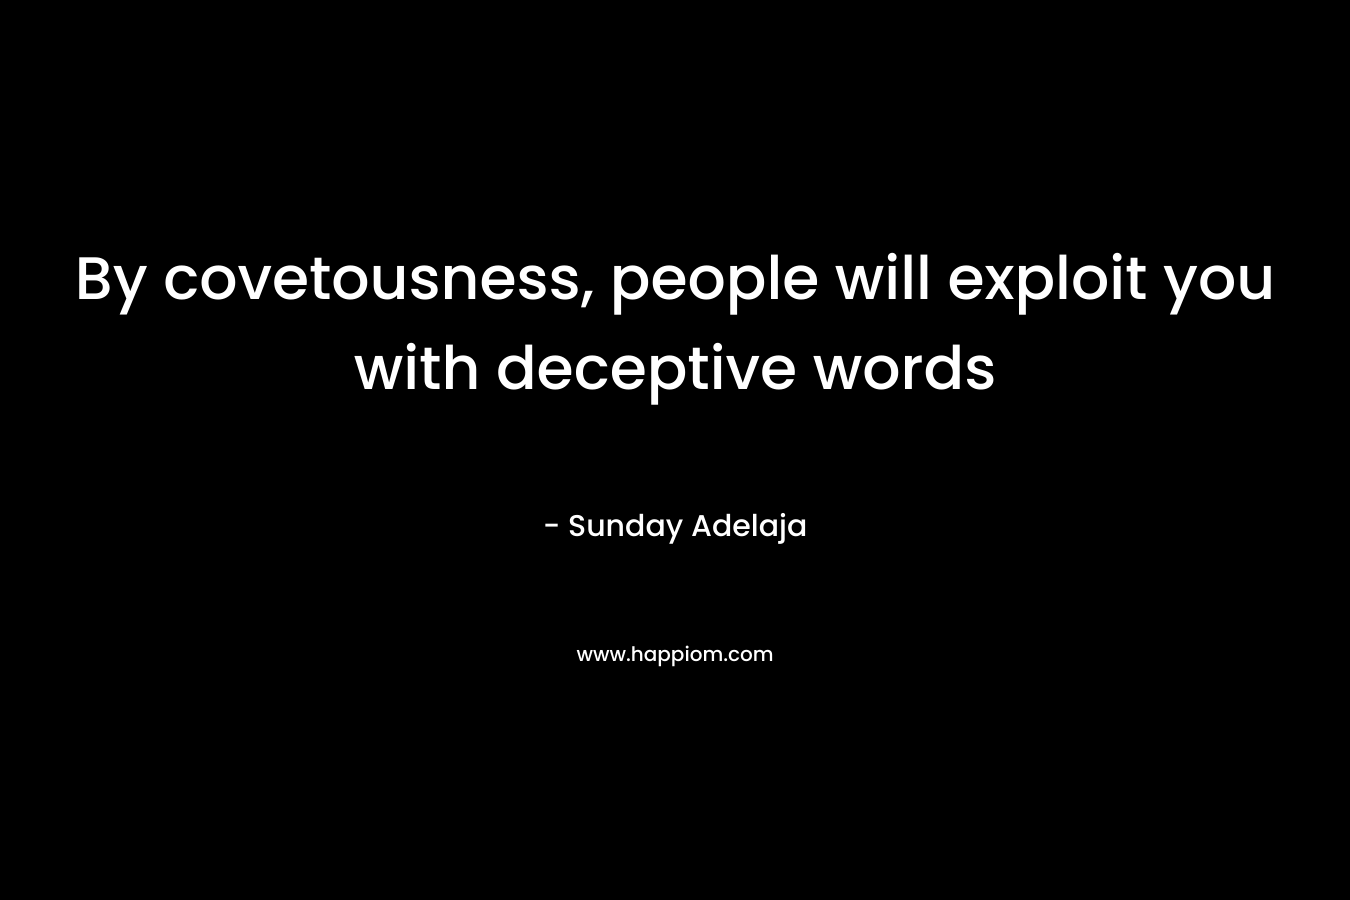 By covetousness, people will exploit you with deceptive words